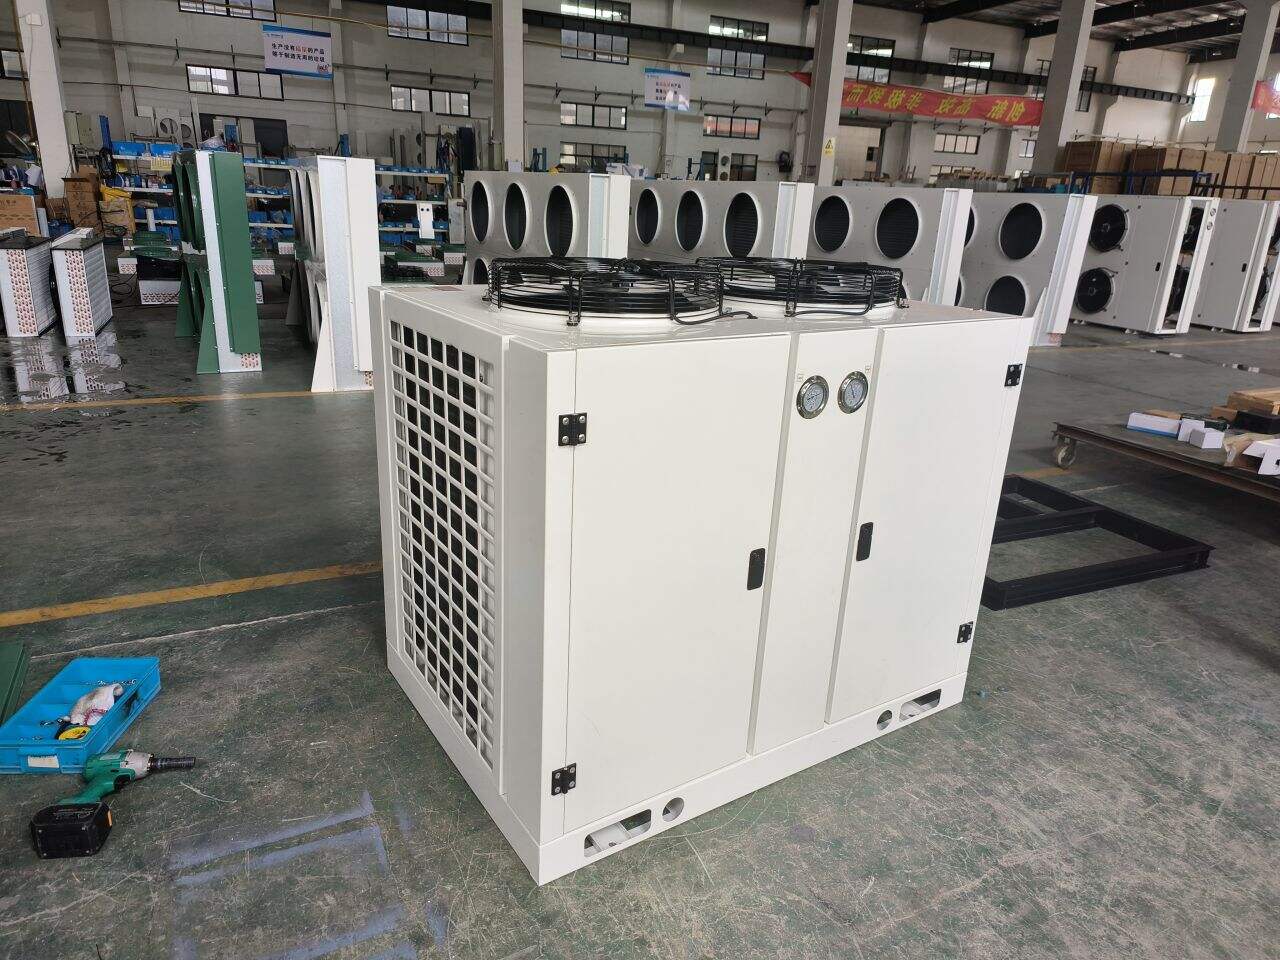 How to Use Cooler Condenser Units?